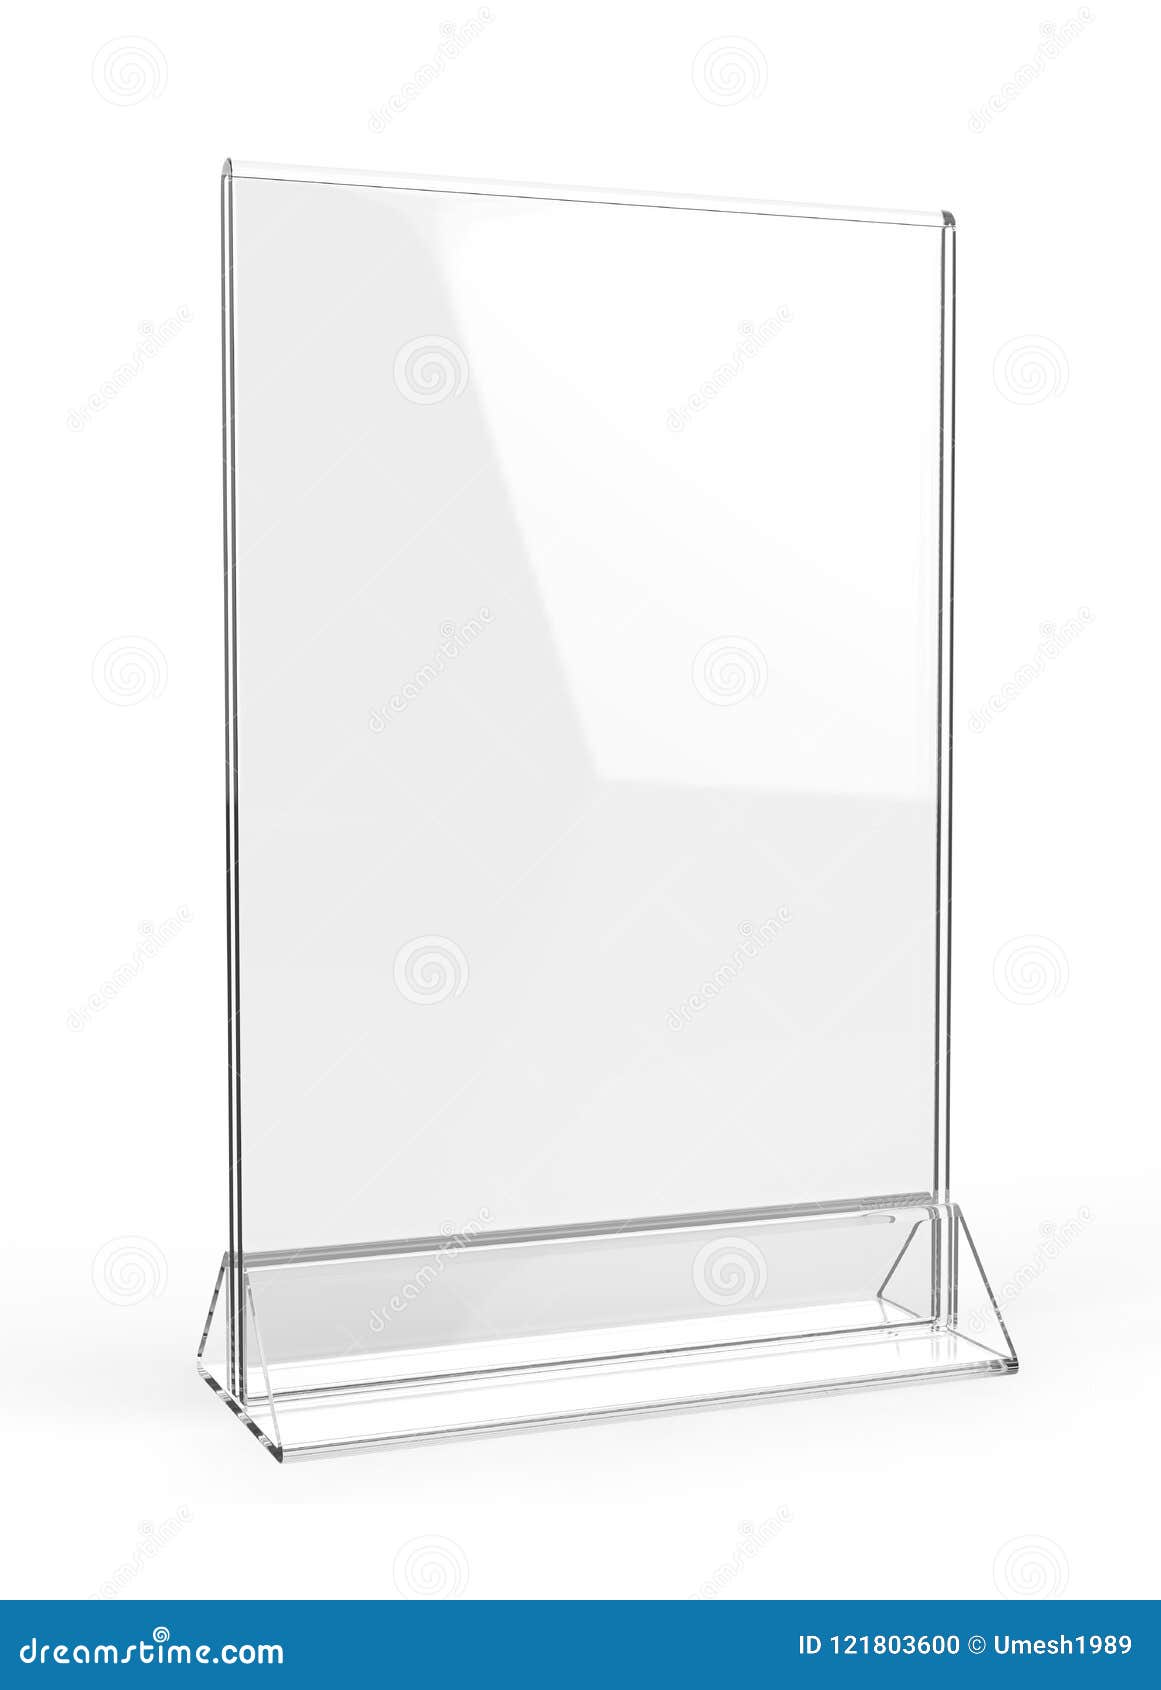 Clear Plastic Plexi Glass Frames For Photos Stores Restaurant Schools Wedding Events 12 Pack 2 Piece Design For Flyer And Menu Holder 8.5 X 11 Acrylic Sign Holder Portrait Secure Padded Shipment